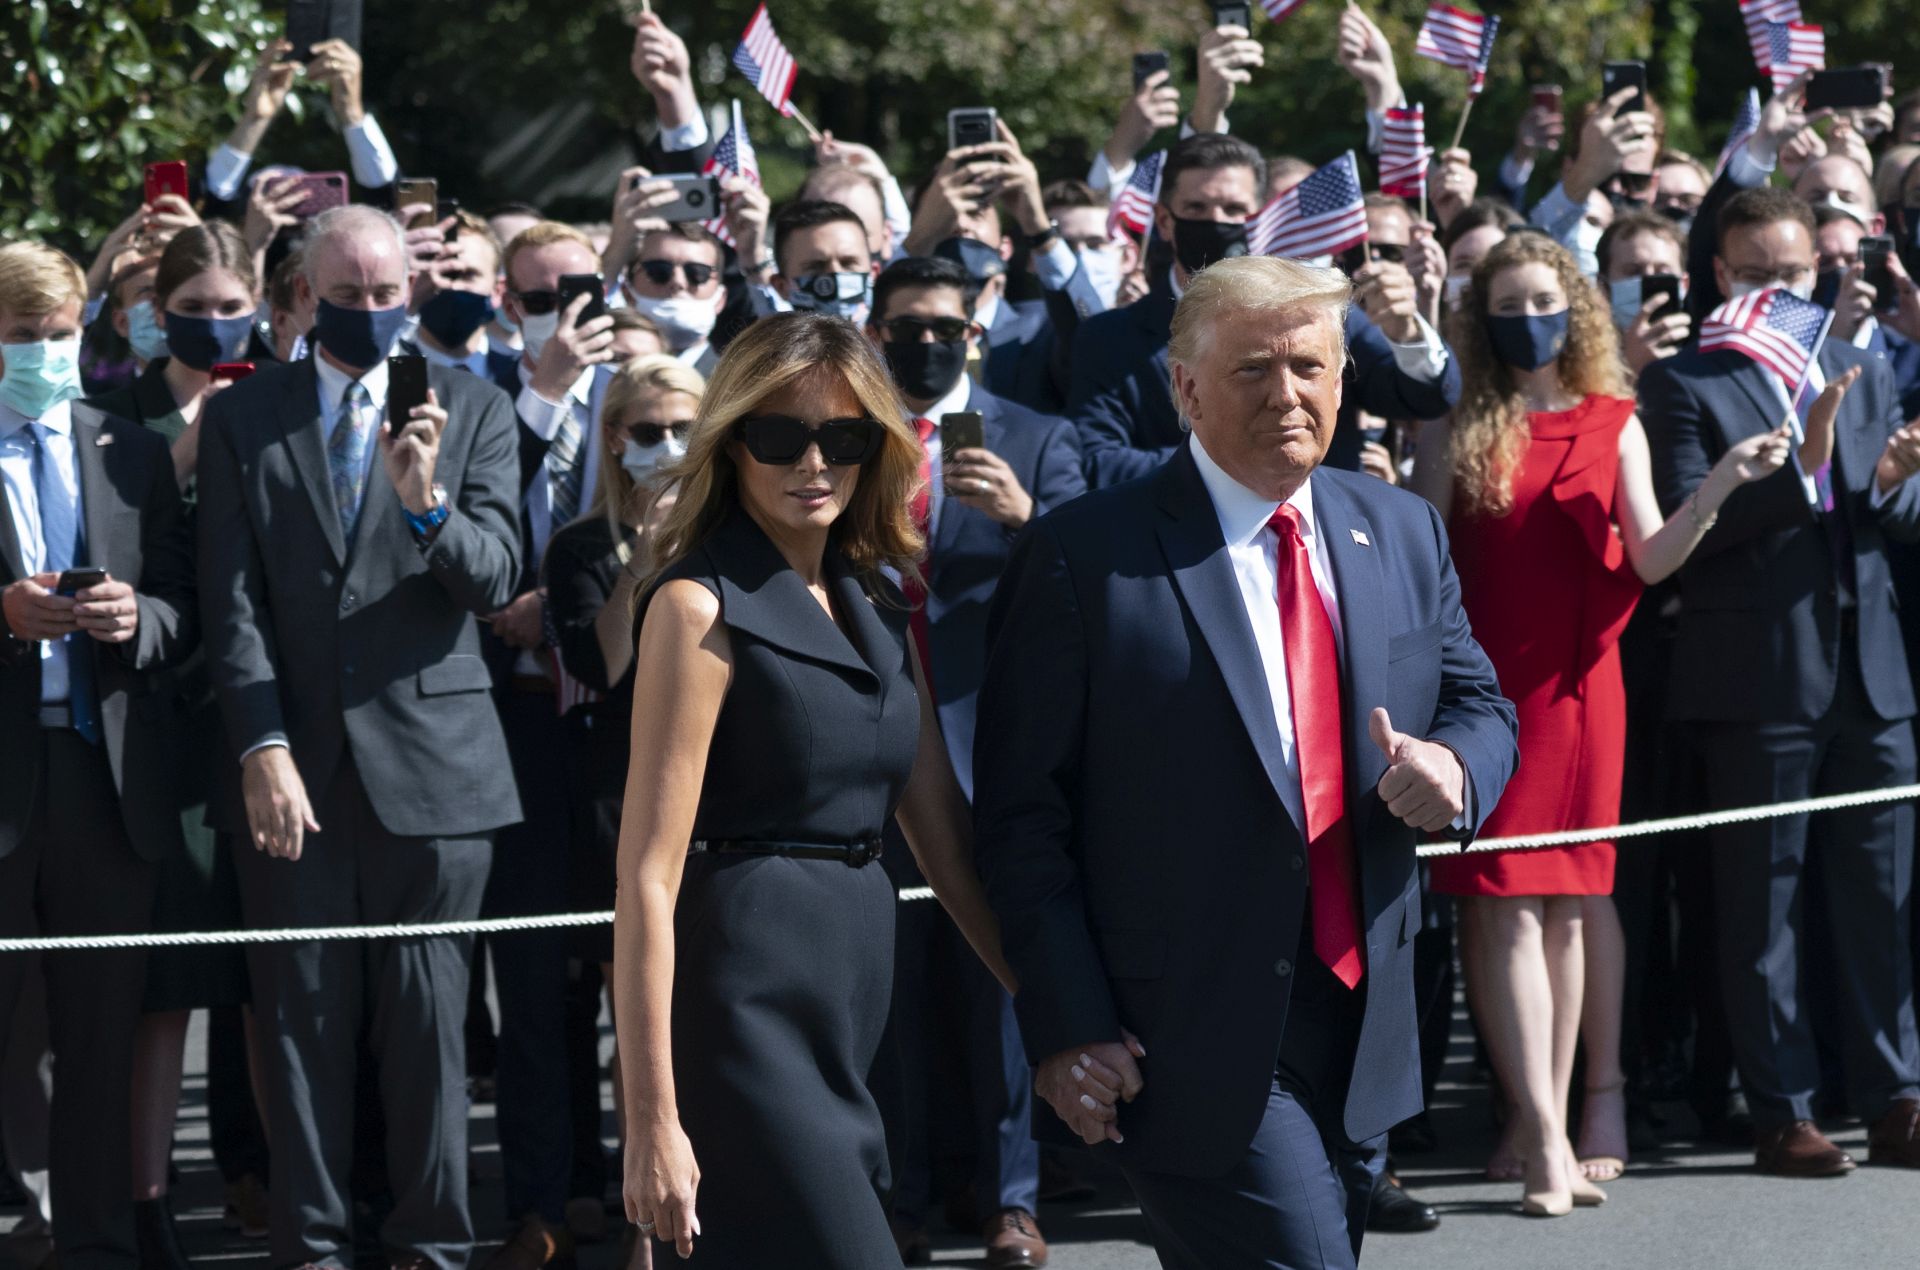 epa08765570 US President Donald J. Trump and First lady Melania Trump depart the White House, in Washington, DC, USA, 22 October 2020, headed for Nashville, Tennessee where he will participate in a debate with democratic presidential candidate former Vice President Joe Biden.  EPA/Chris Kleponis / POOL